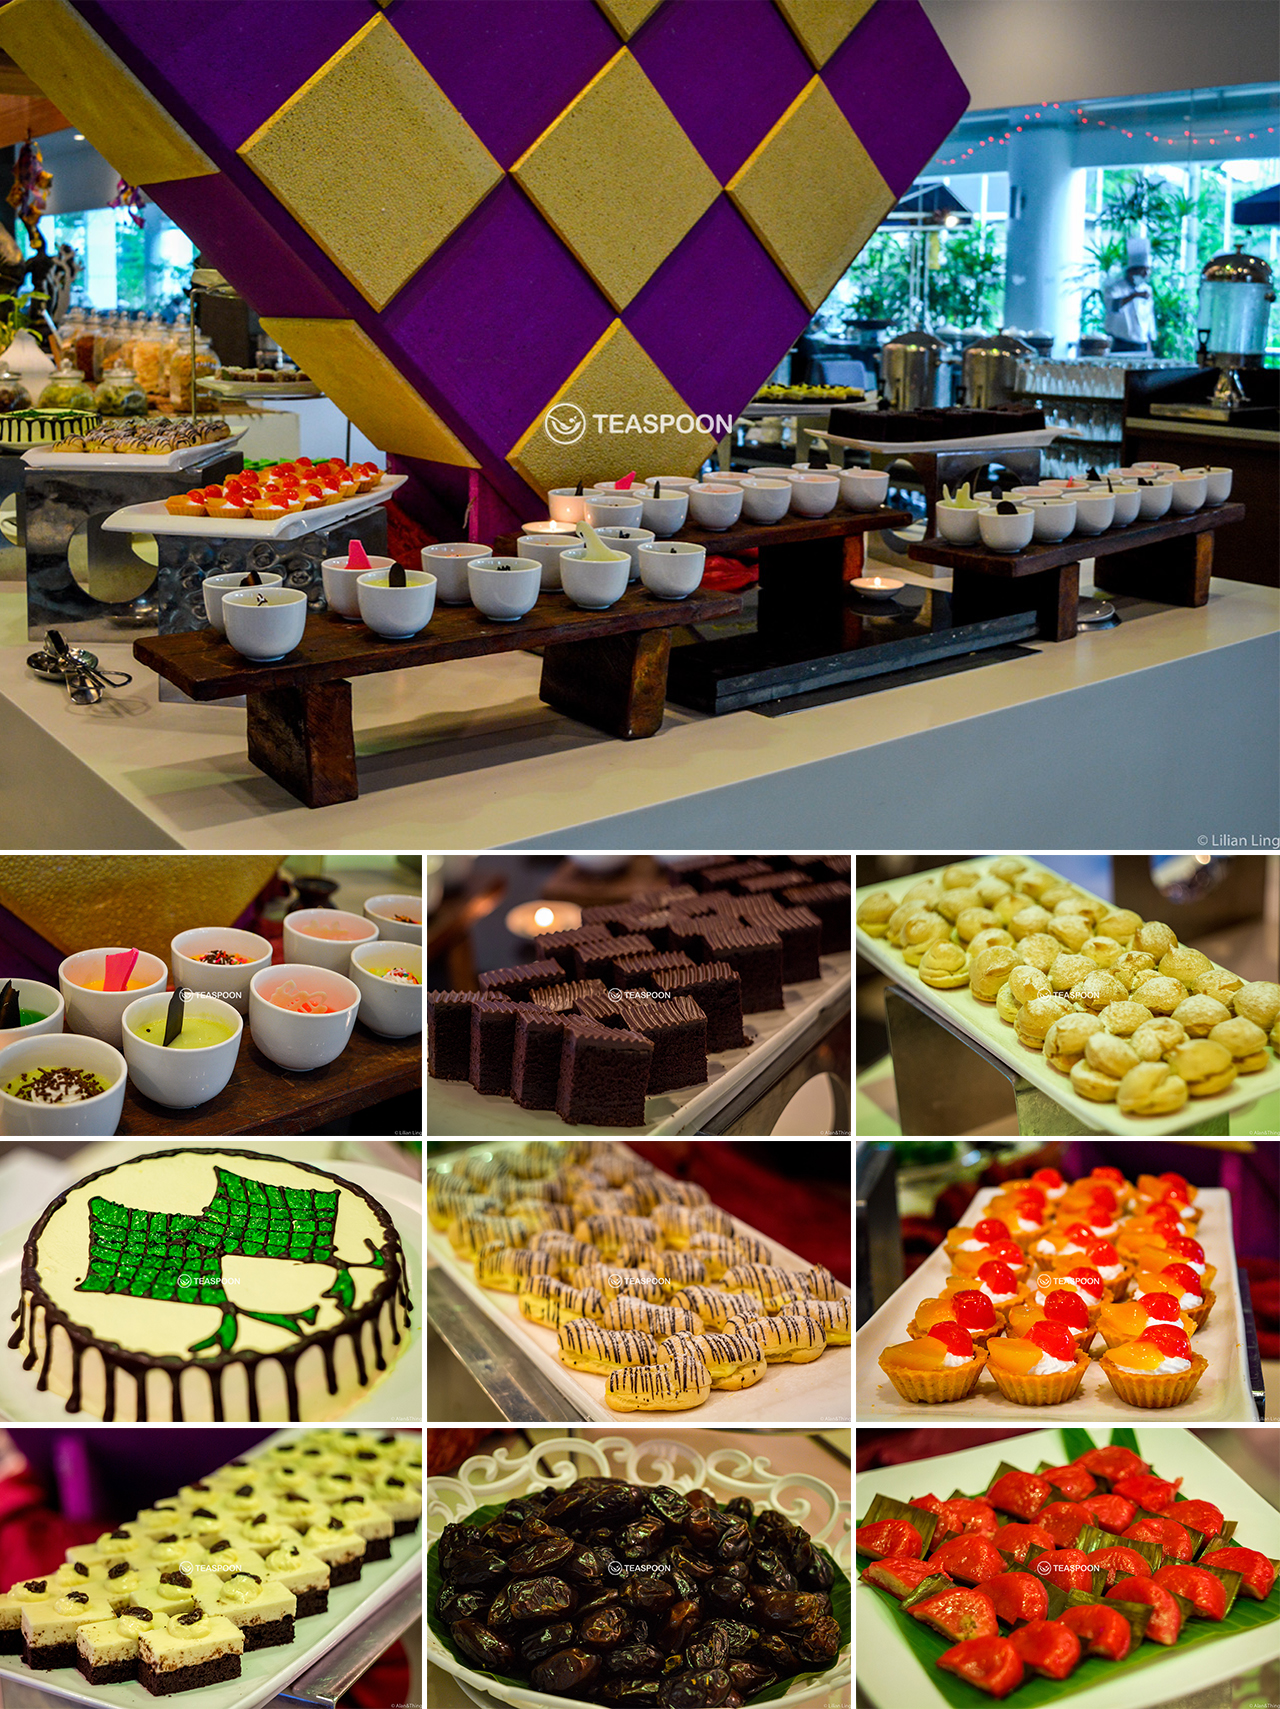 【The First International & Chinese Ramadhan Buffet under One Roof?】This